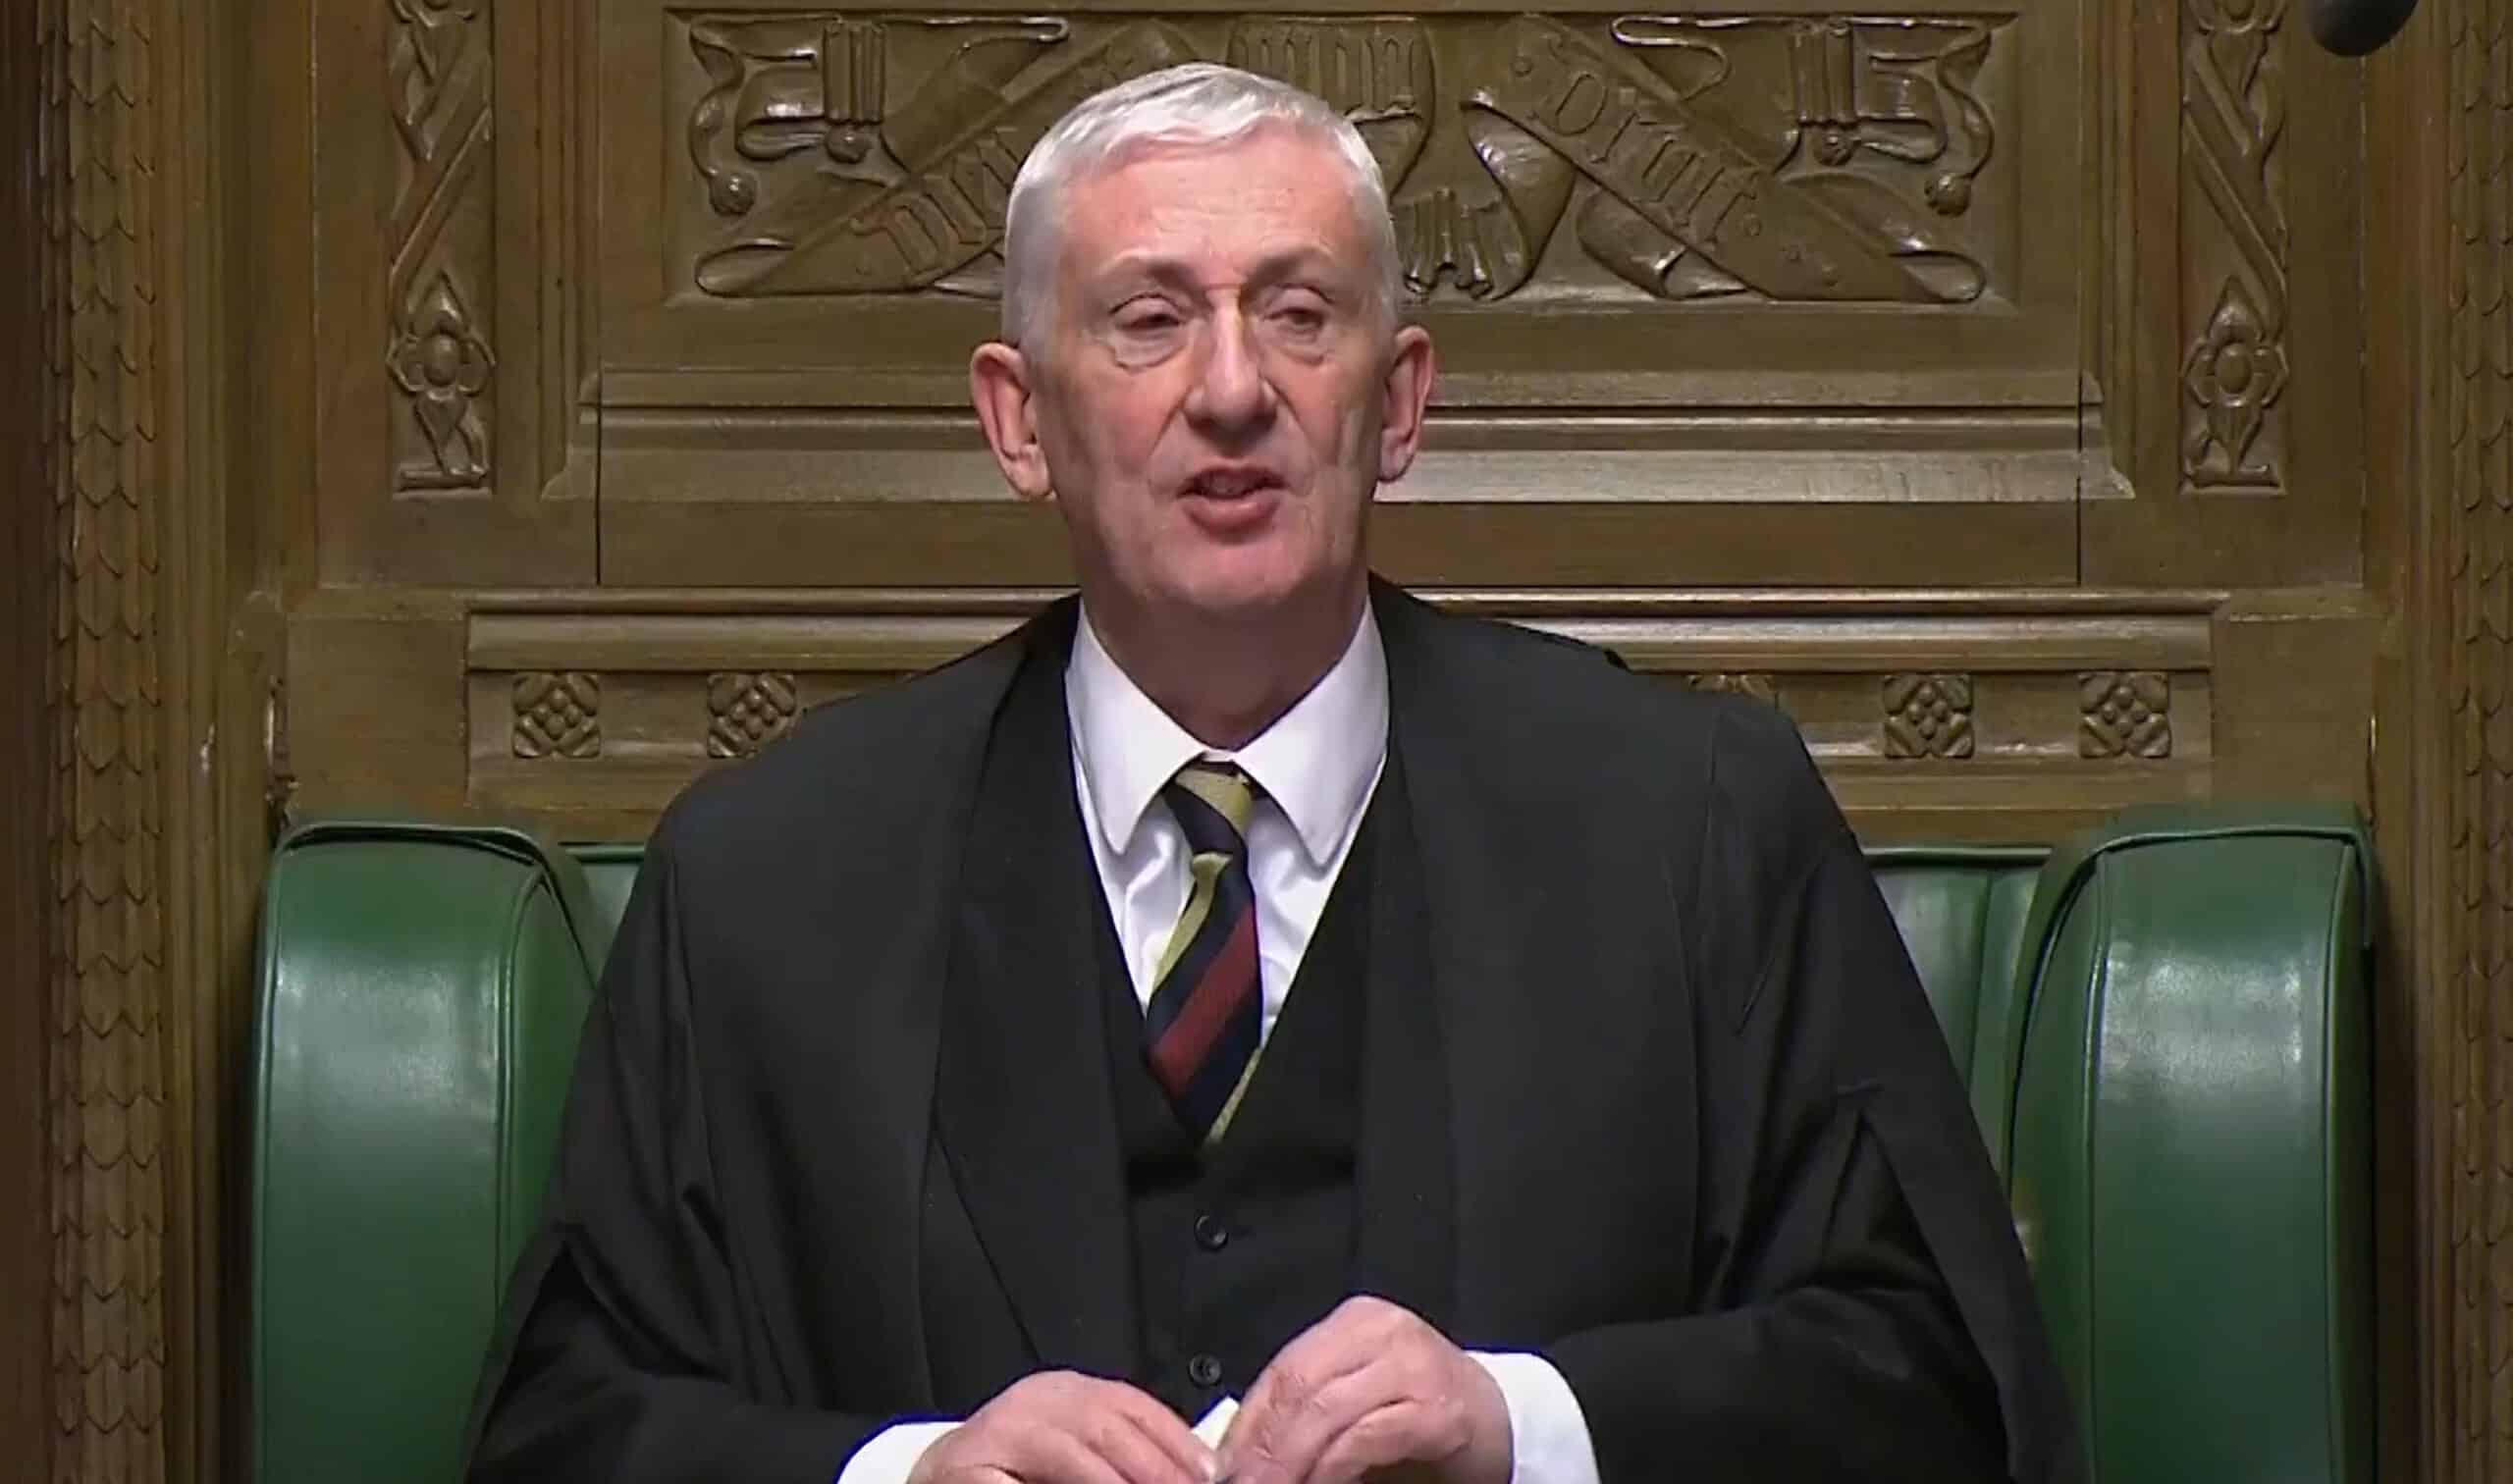 Calls for the Speaker to resign after he fails to take question from Diane Abbott